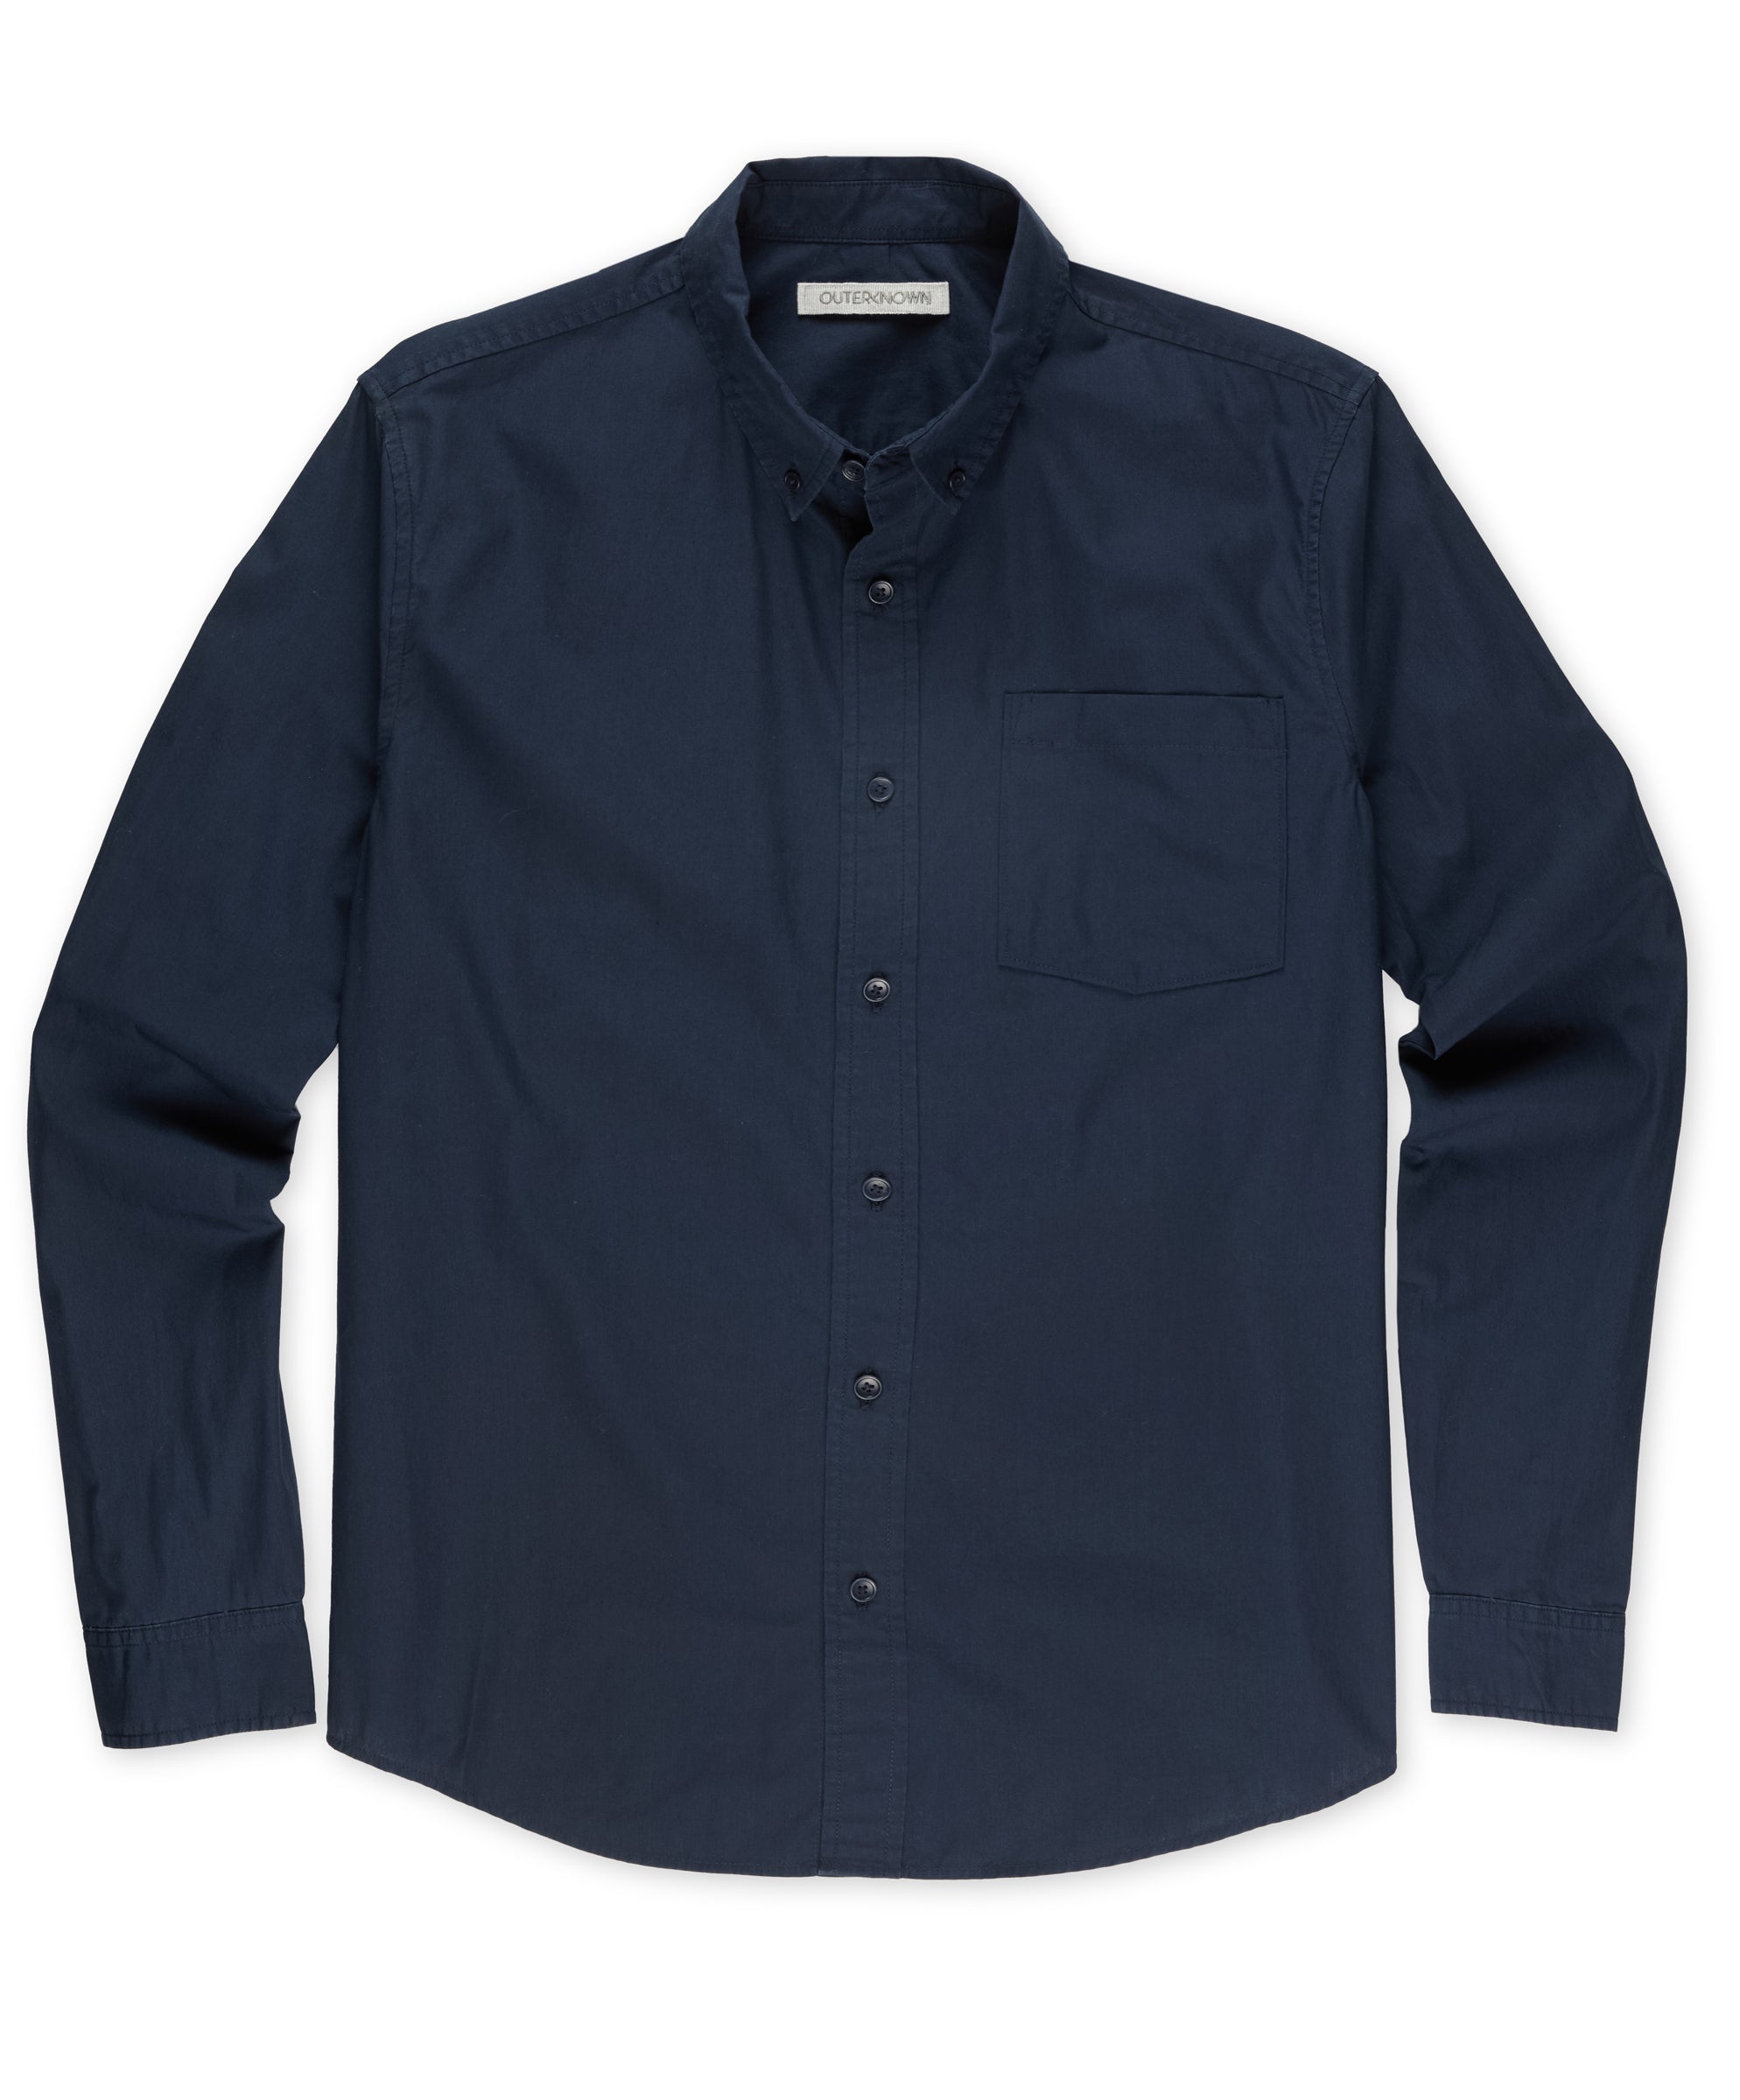 The Studio Shirt | Men's Shirts | Outerknown